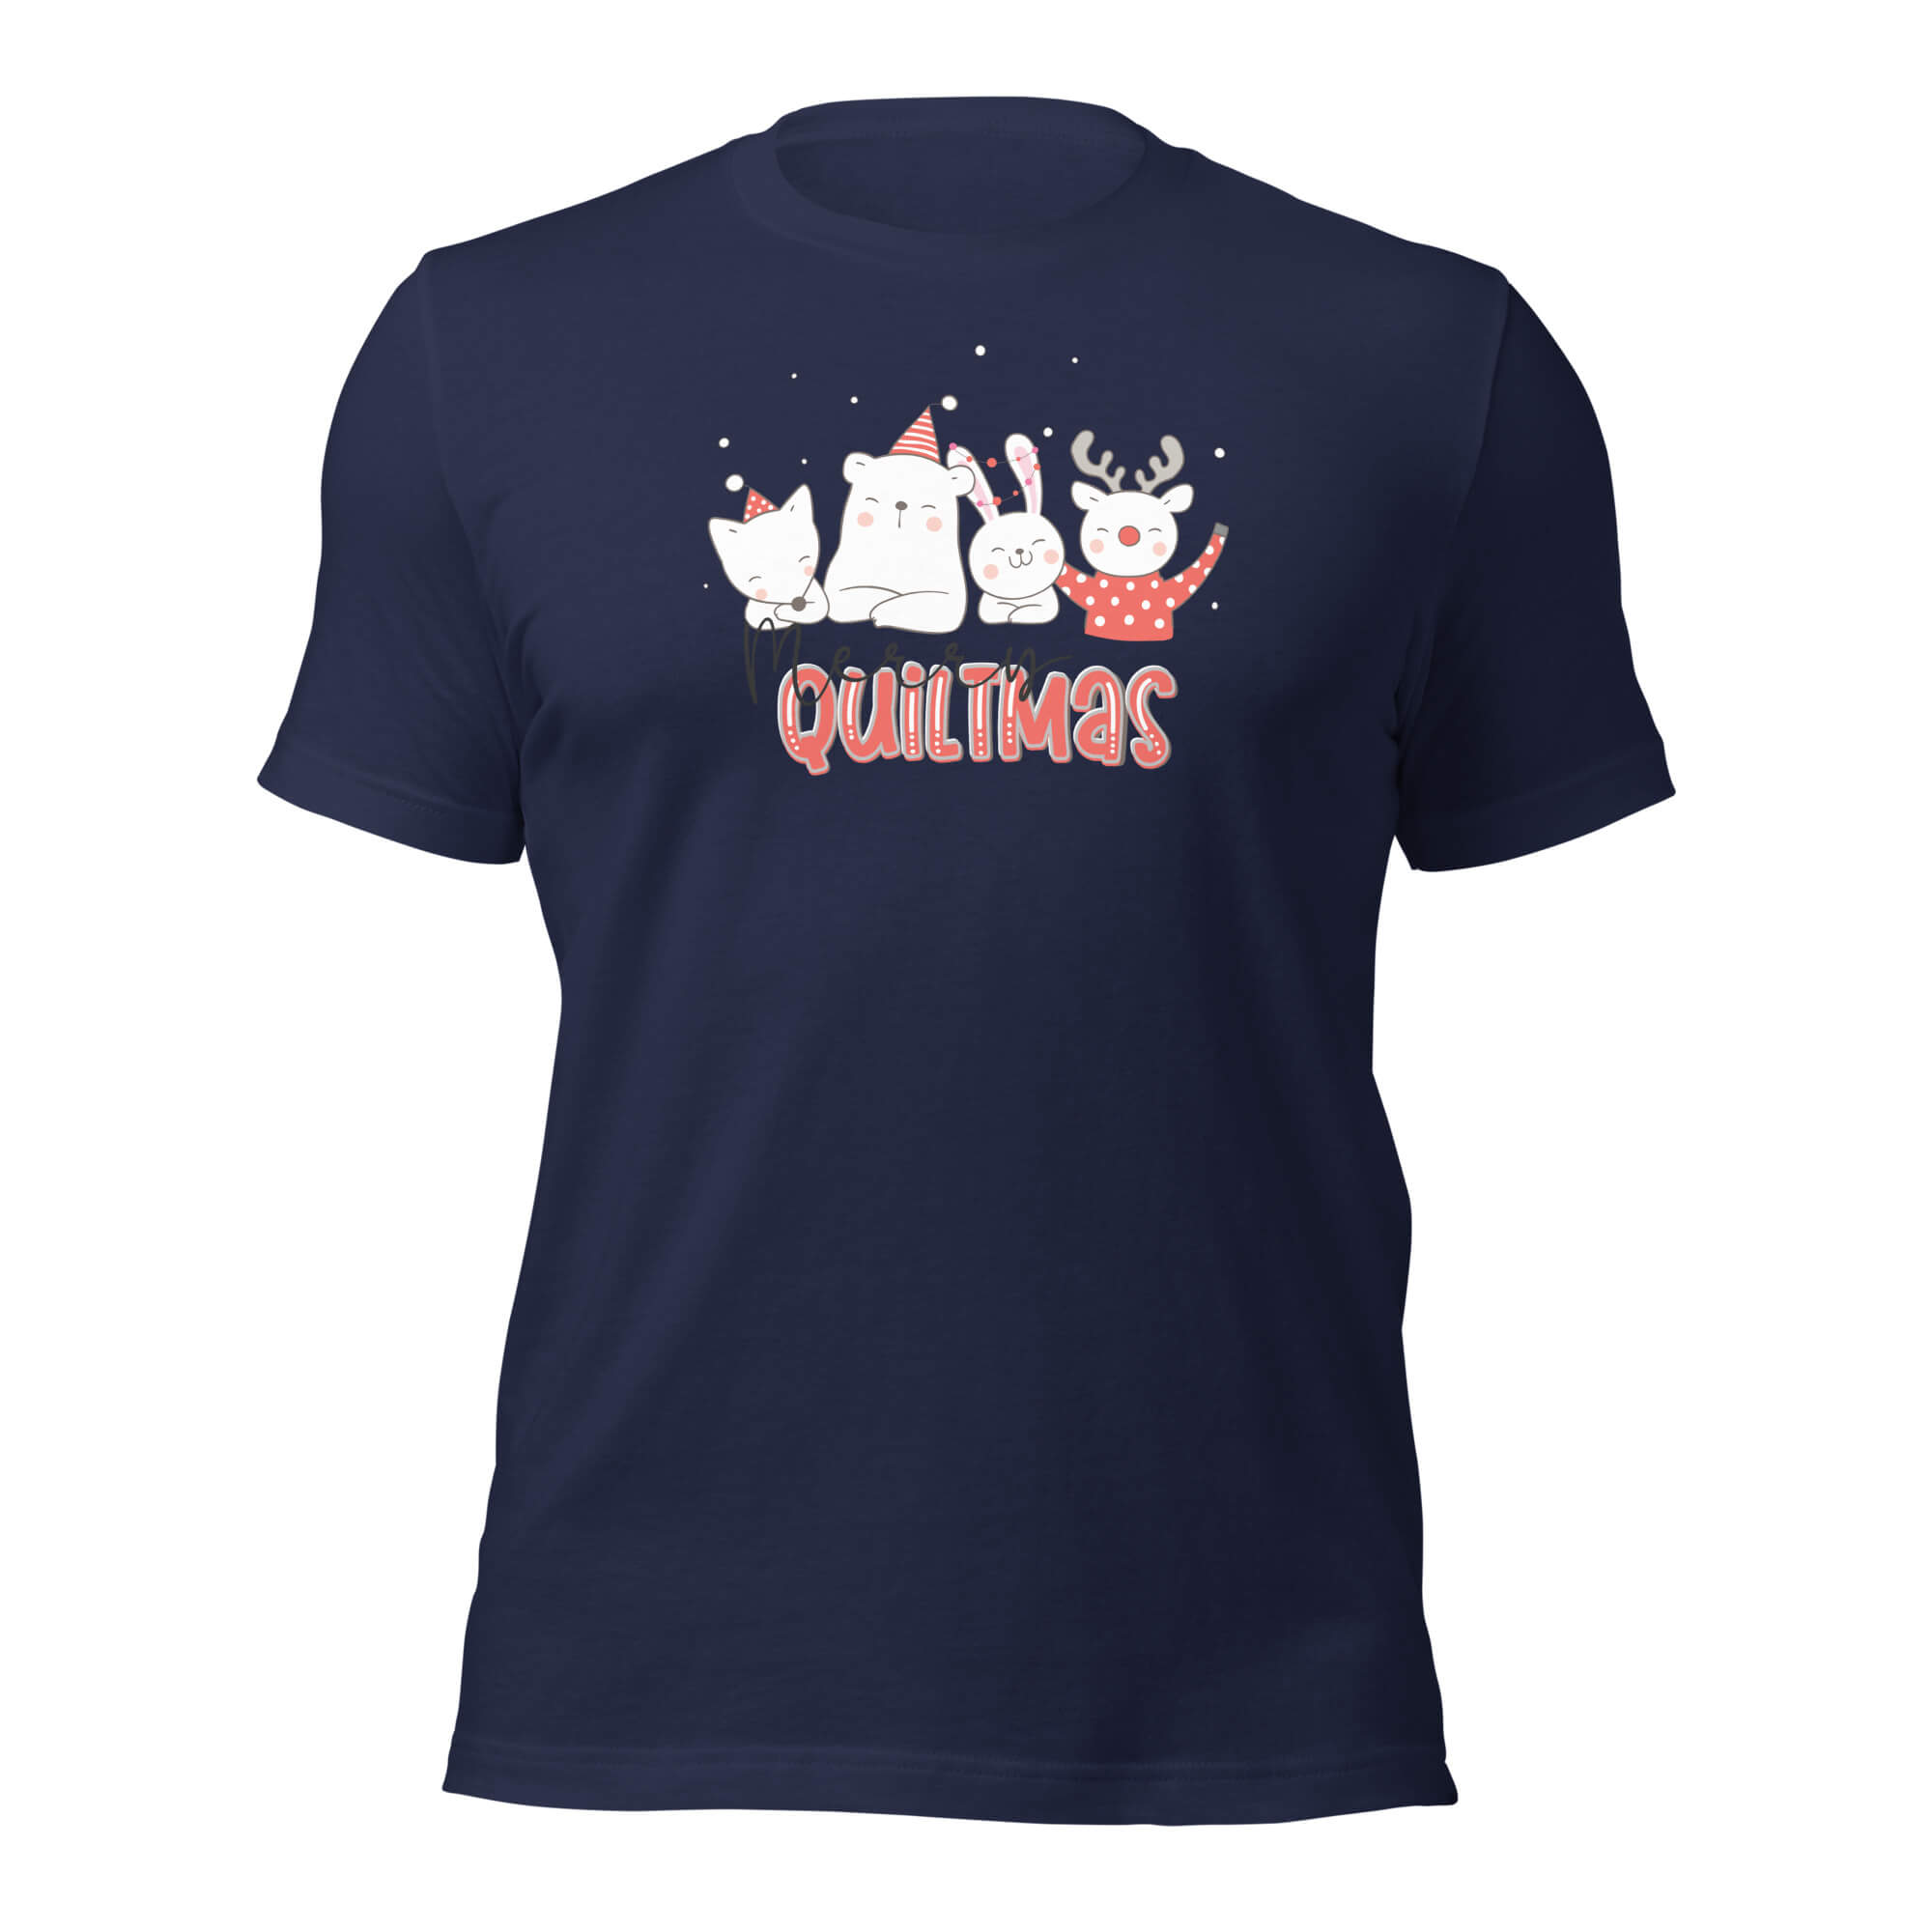 merry-quiltmas-t-shirt-navy